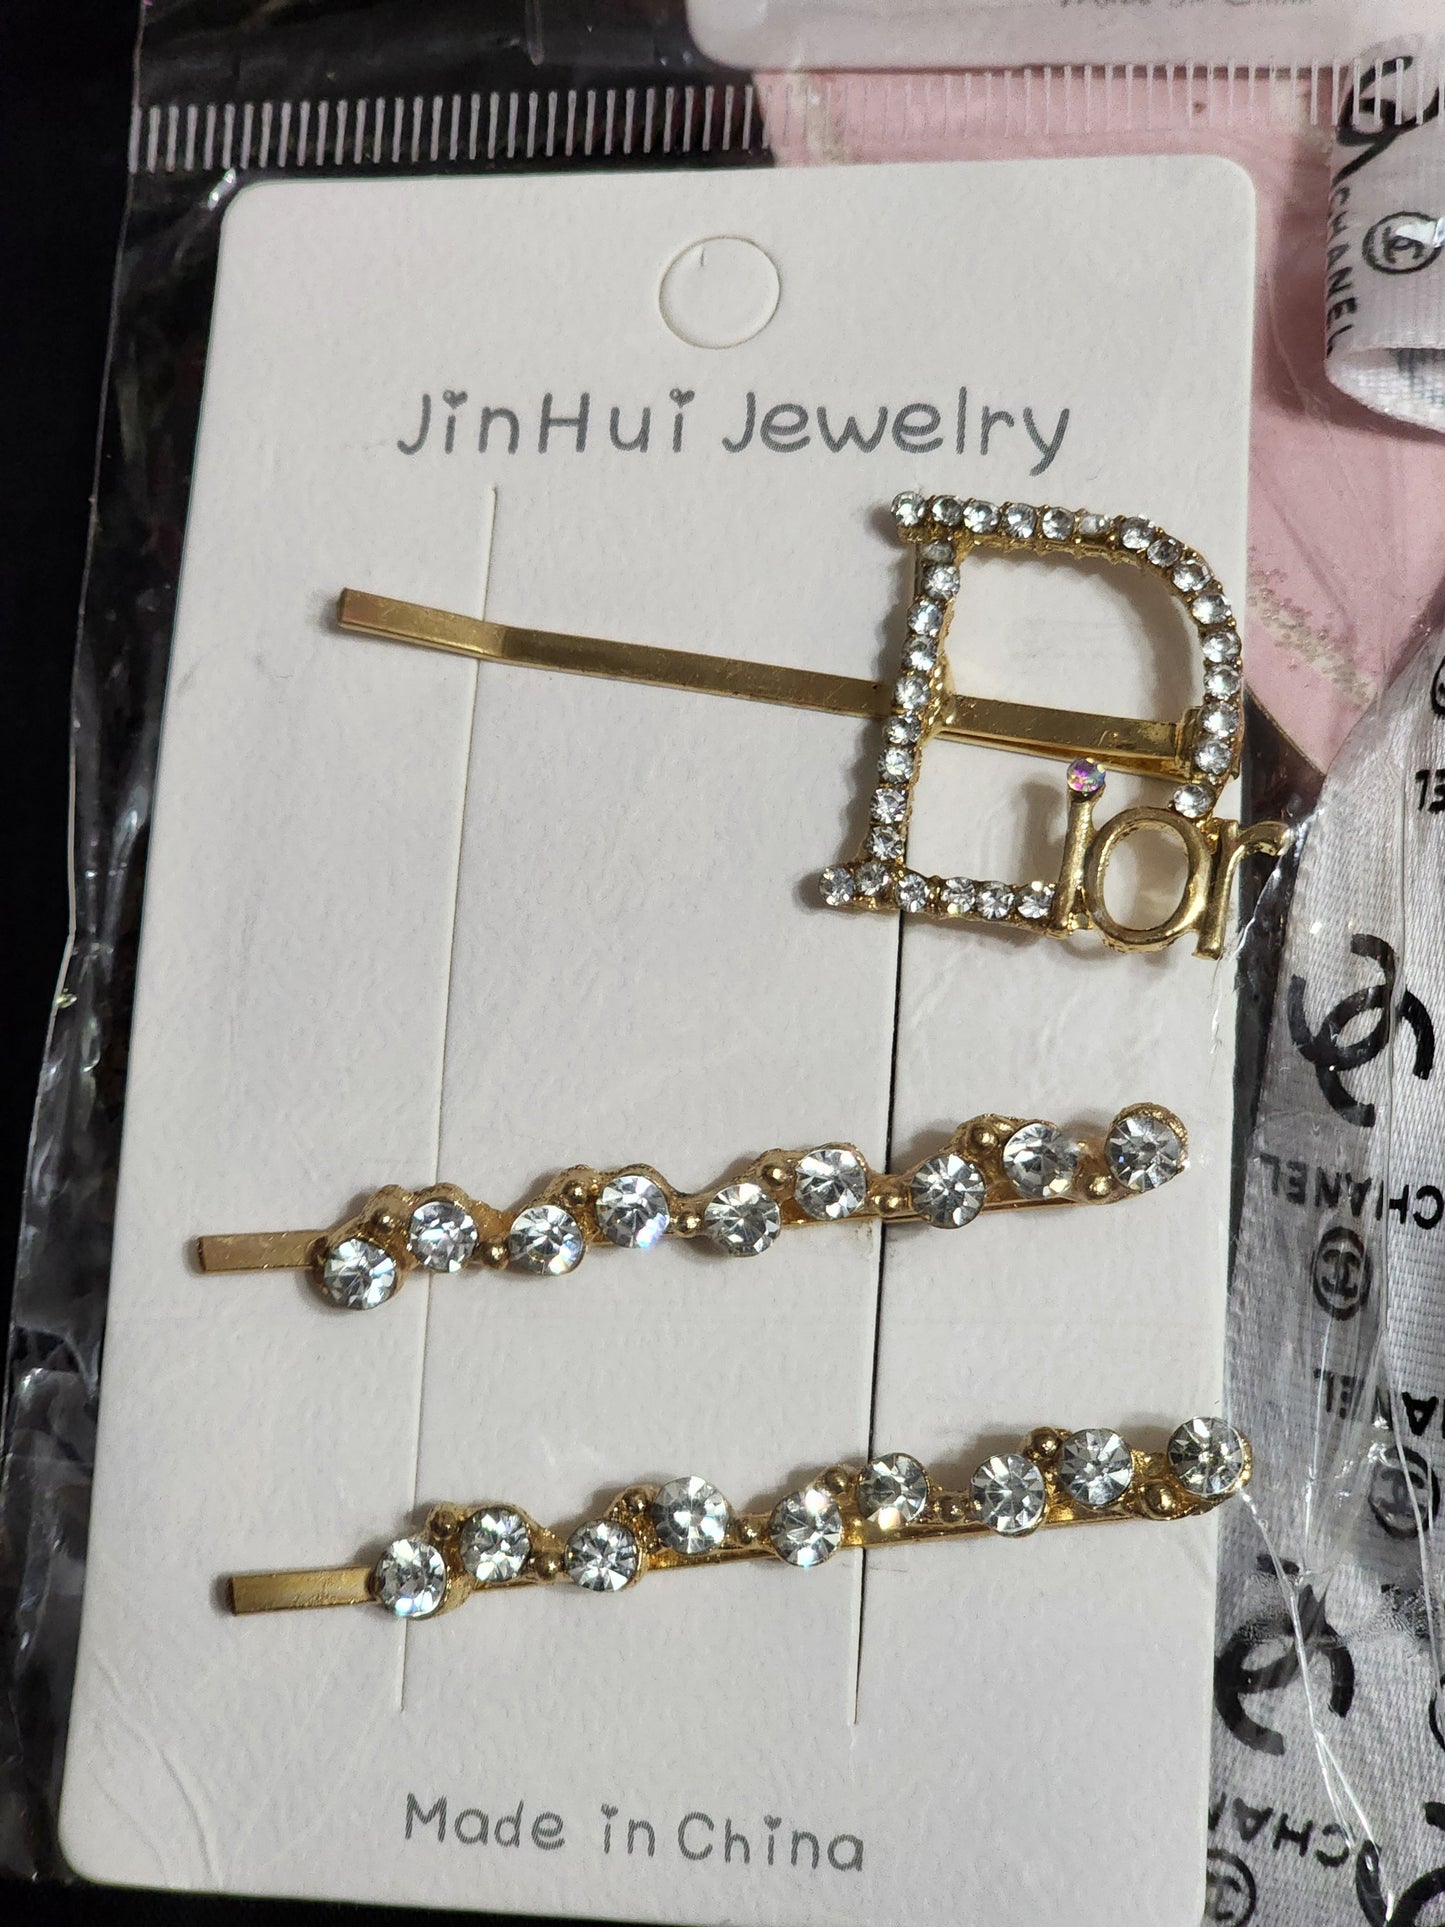 Inspired By Hair Pins/Clips Gold or Silver with Rhinestones or Packs of 5 Hair Clips